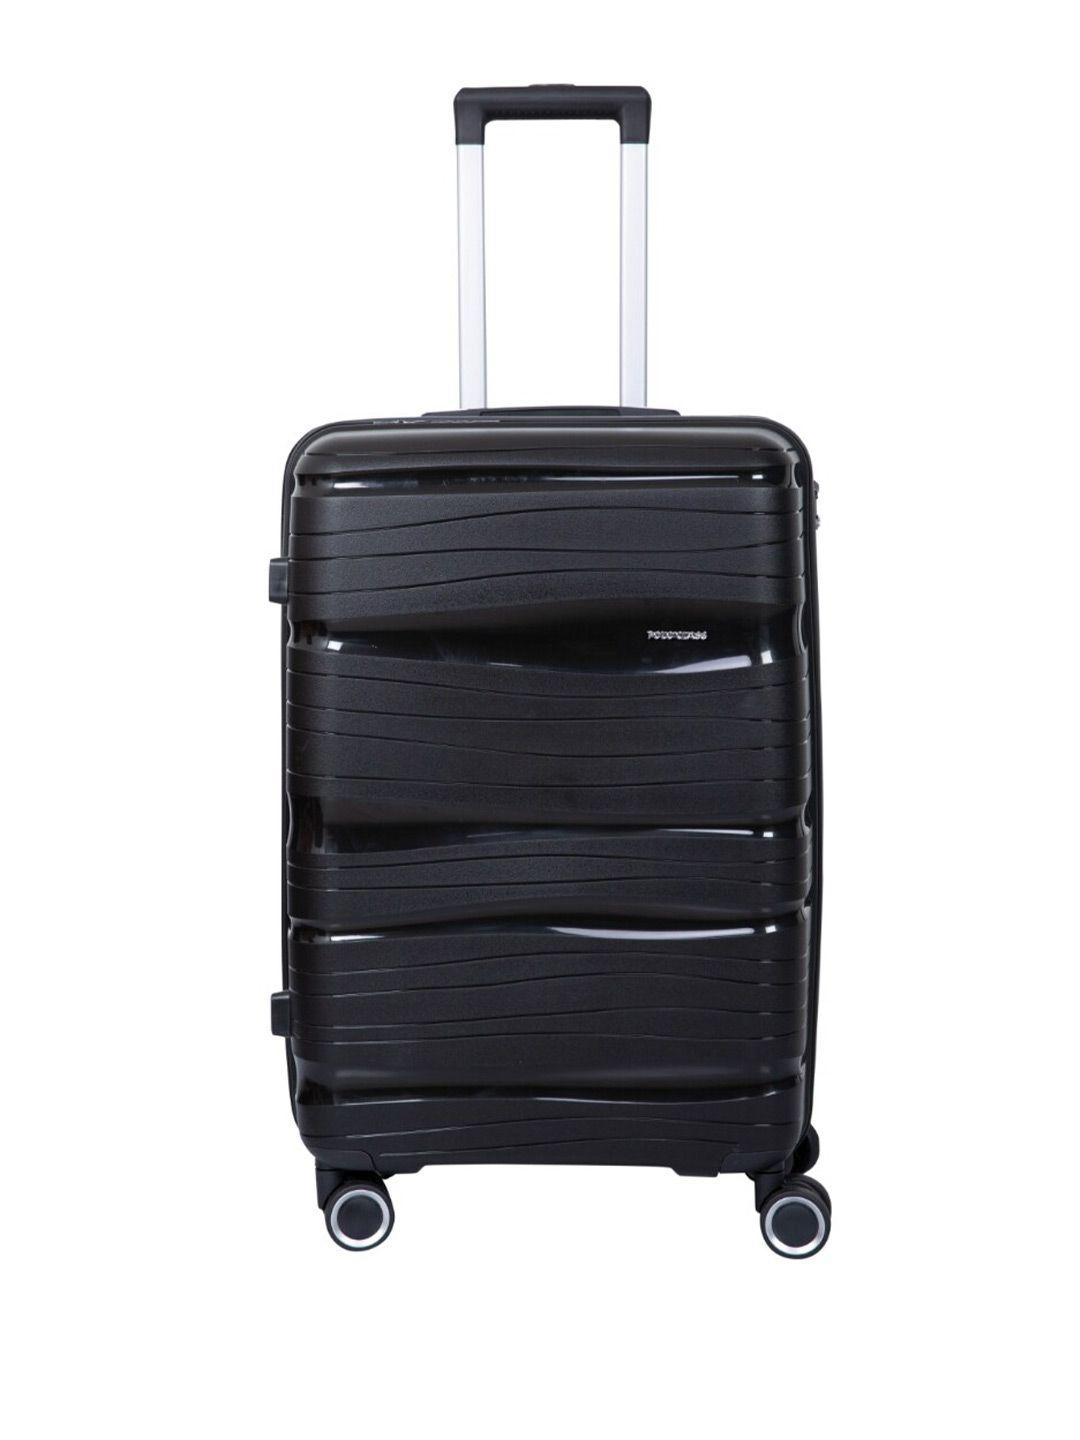 polo class hard sided large trolley bags-50 l